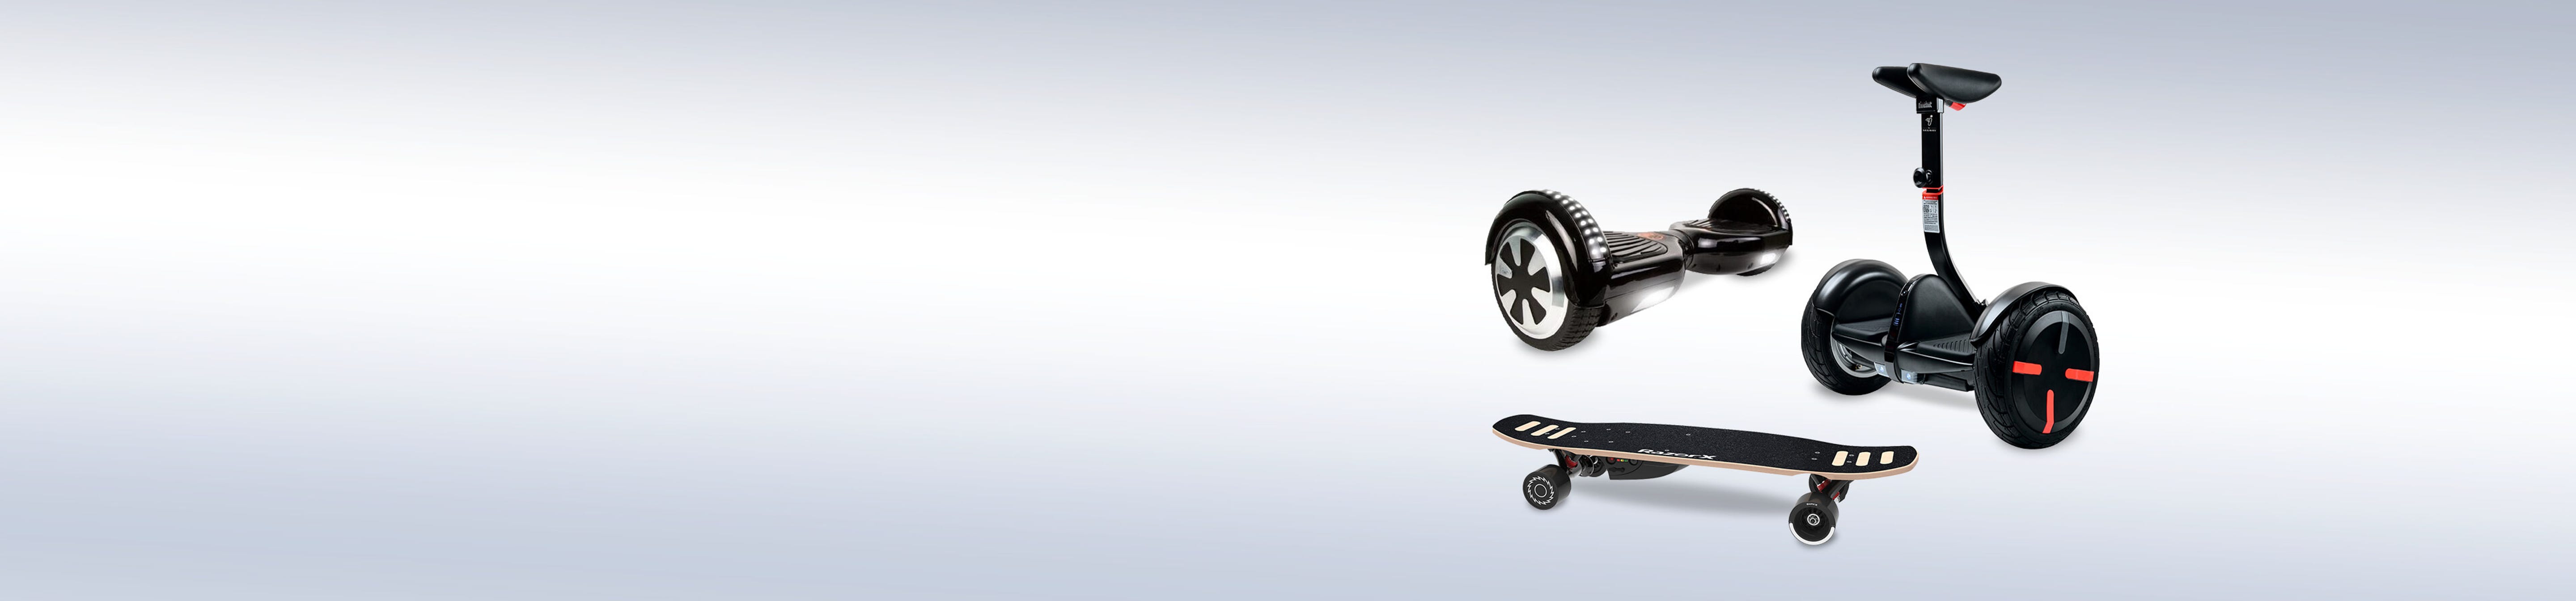 Hoverboards Skateboards Best Buy Canada - buying almost all skate boards hoverboards robloxian high